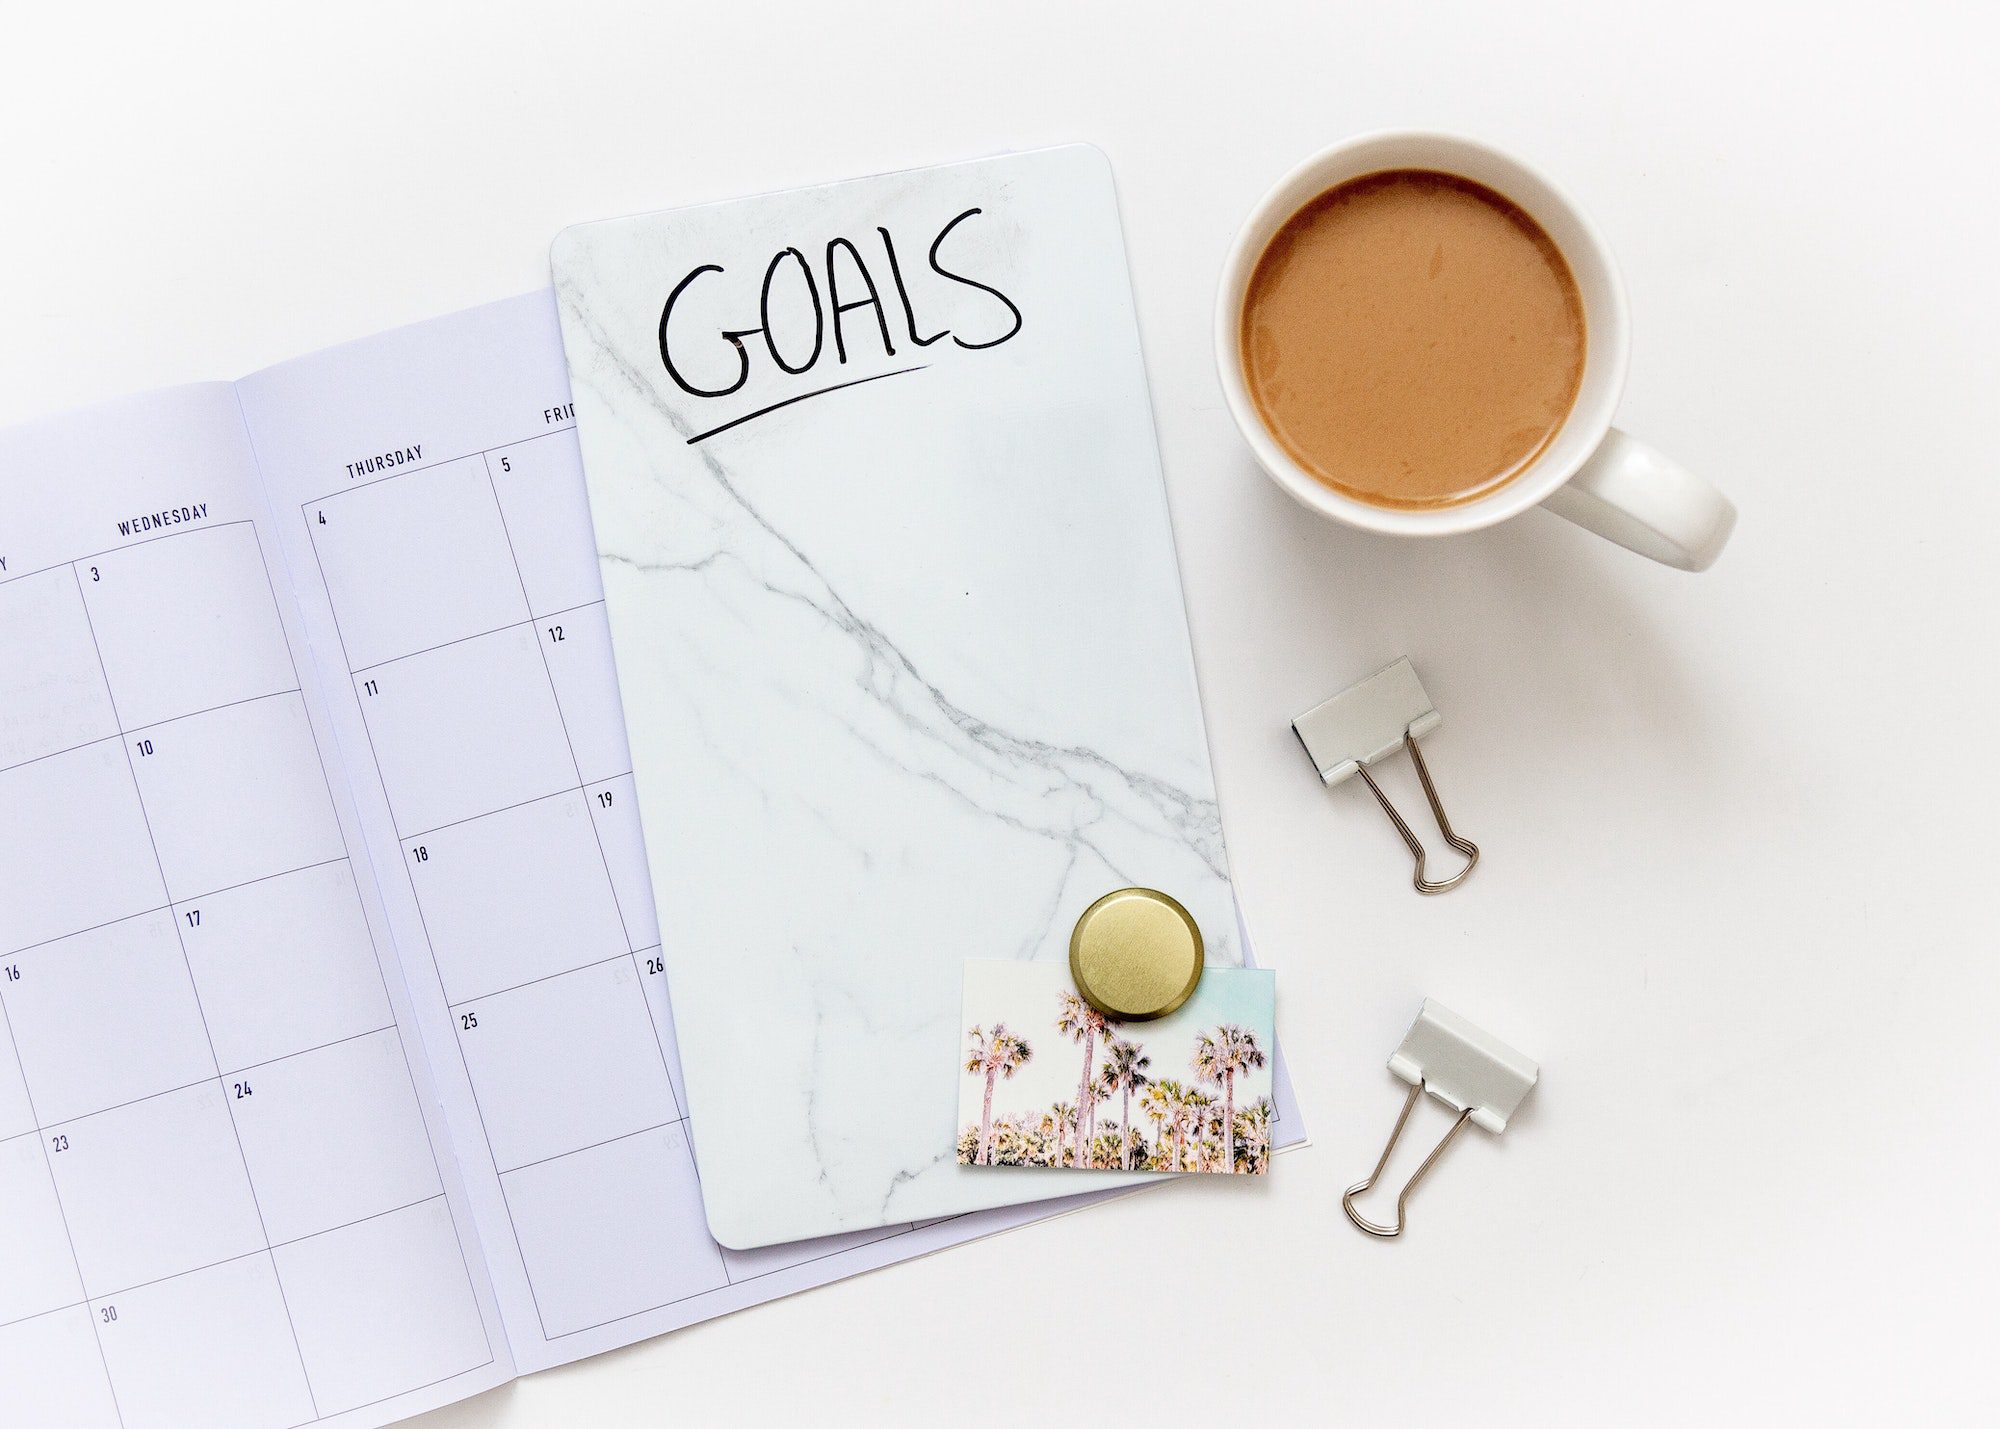 Combining the Mind and Effective Goal-Setting